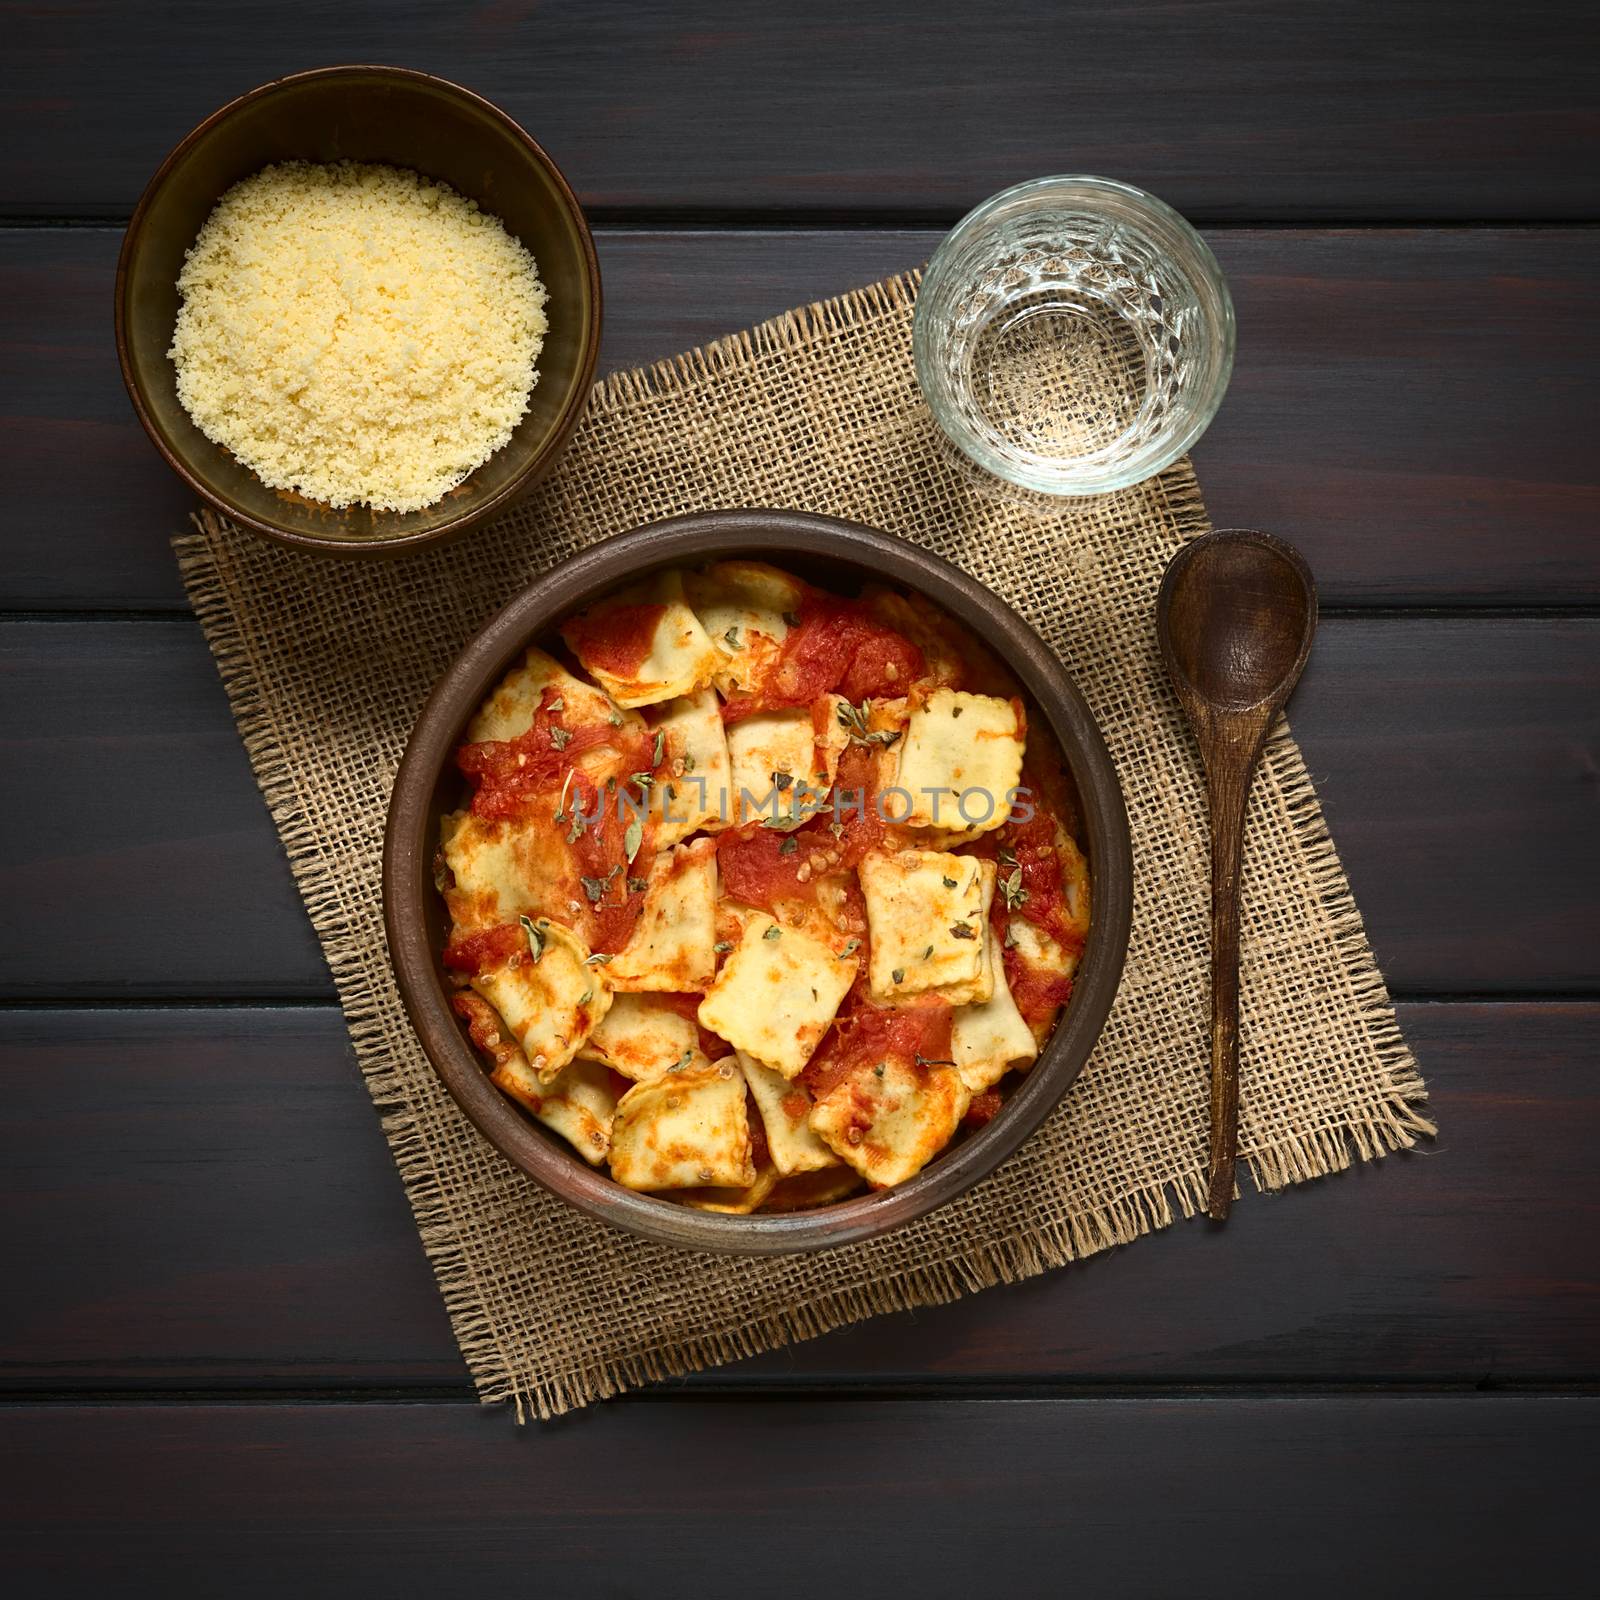 Baked ravioli with homemade tomato sauce in rustic bowl with grated cheese in small bowl, glass of water and wooden spoon on the side, photographed overhead on dark wood with natural light